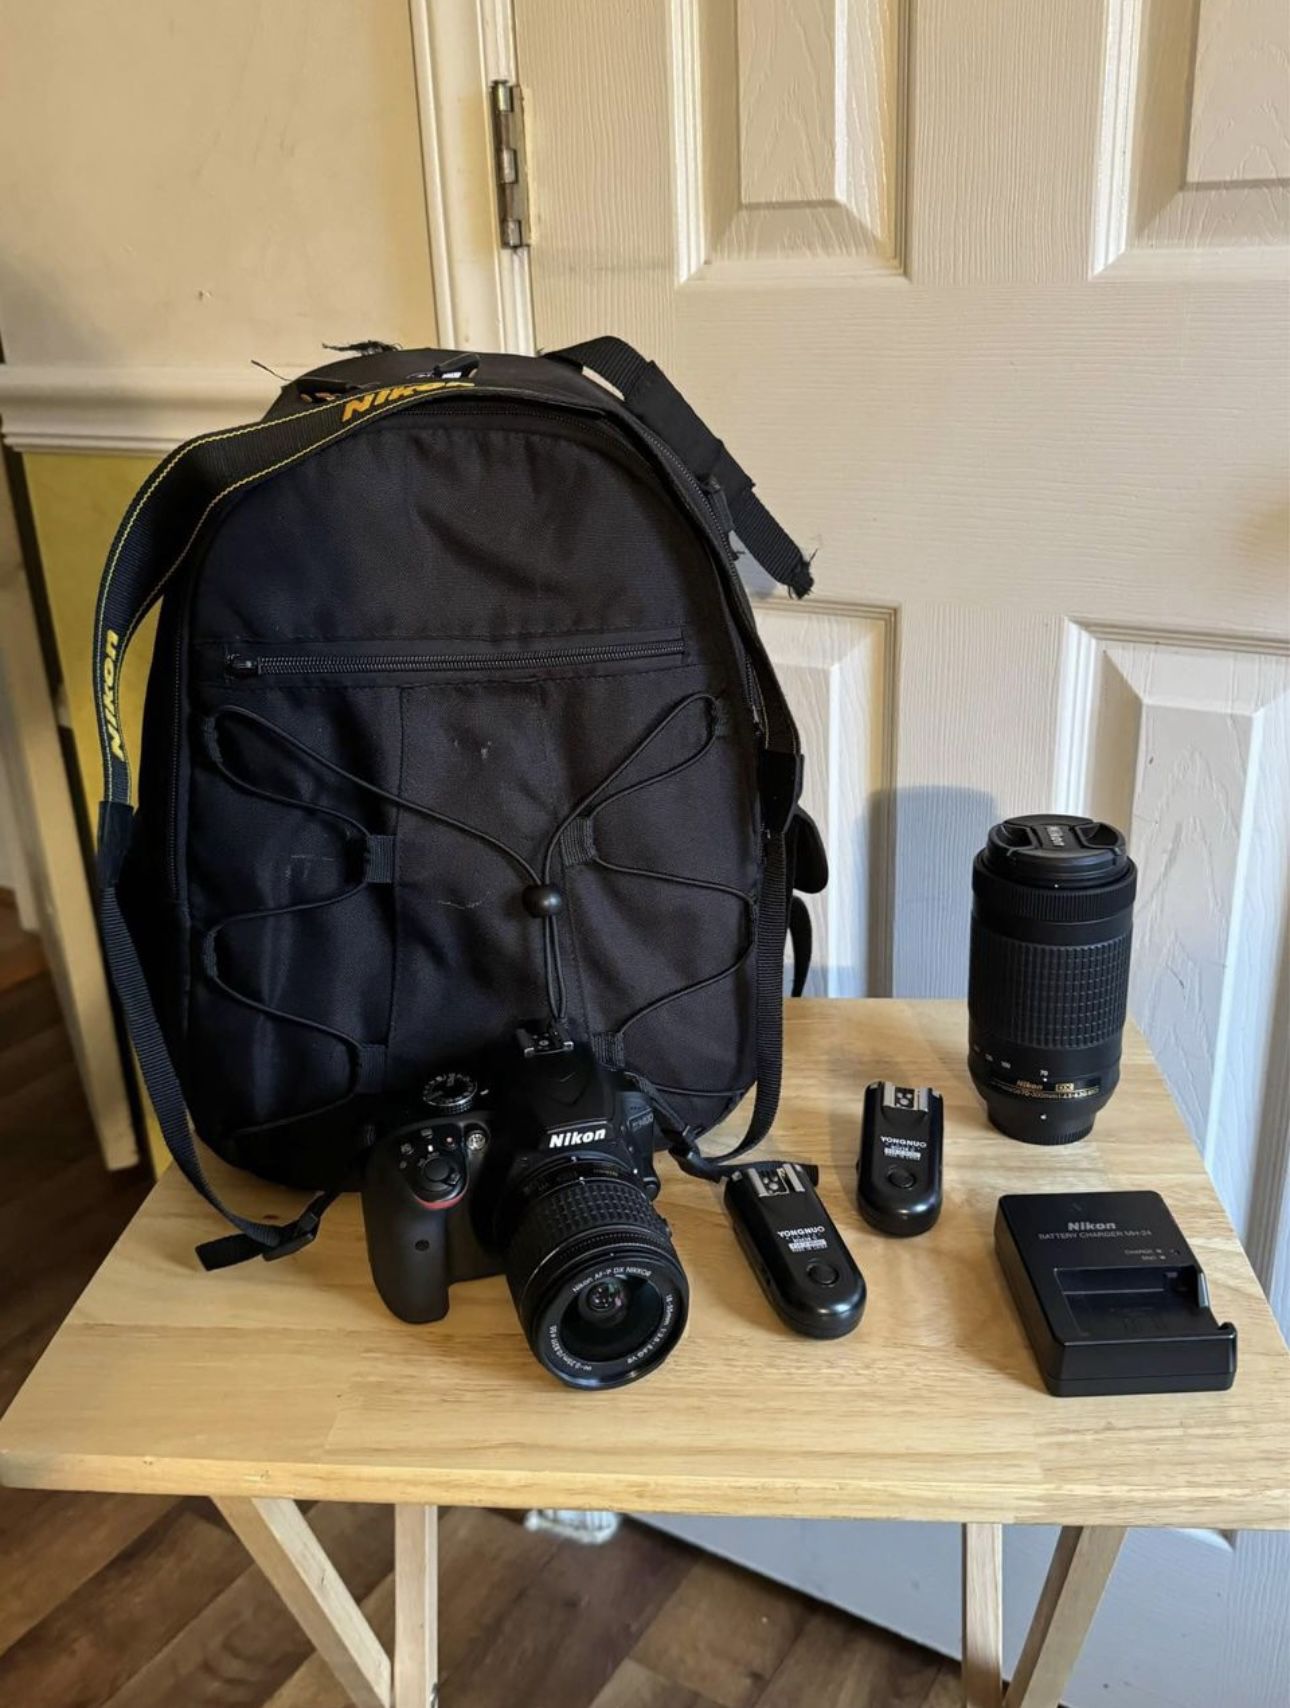 Nikon D3400 DSLR Camera with 18-55mm and 70-300mm Lenses and extras